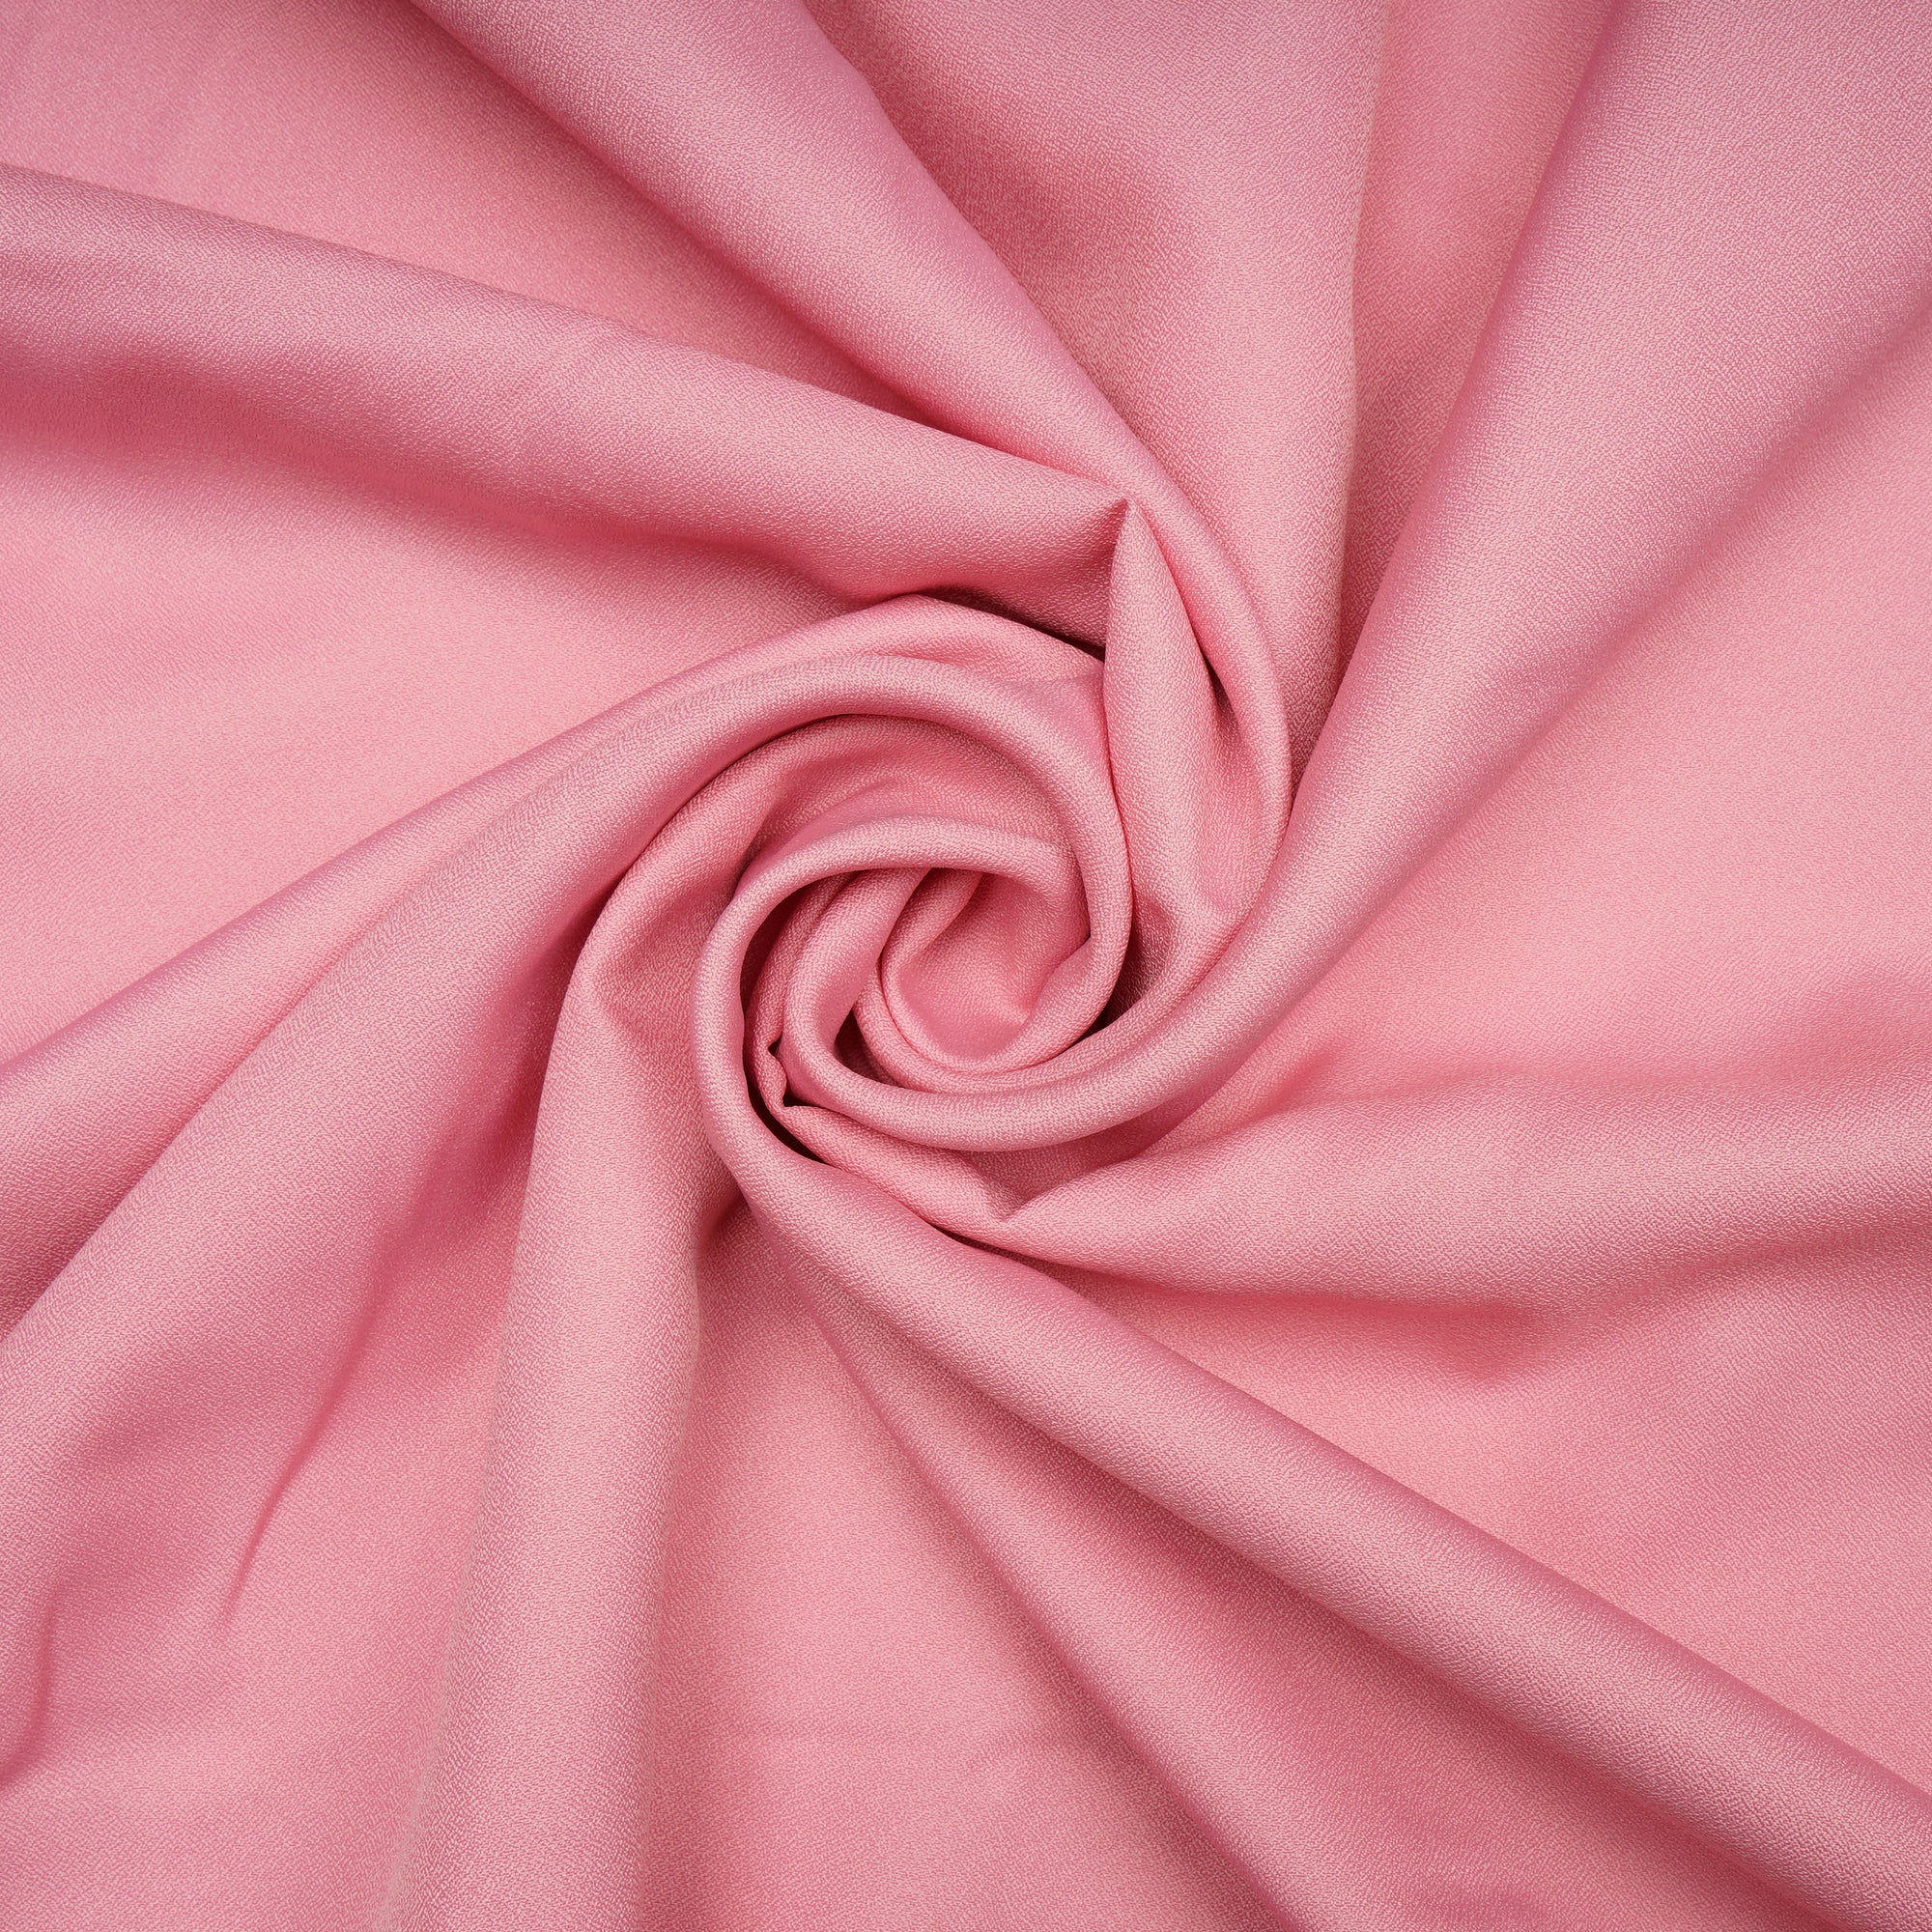 Geranium Pink Solid Dyed Imported Amazon Moss Crepe Fabric (60" Width)